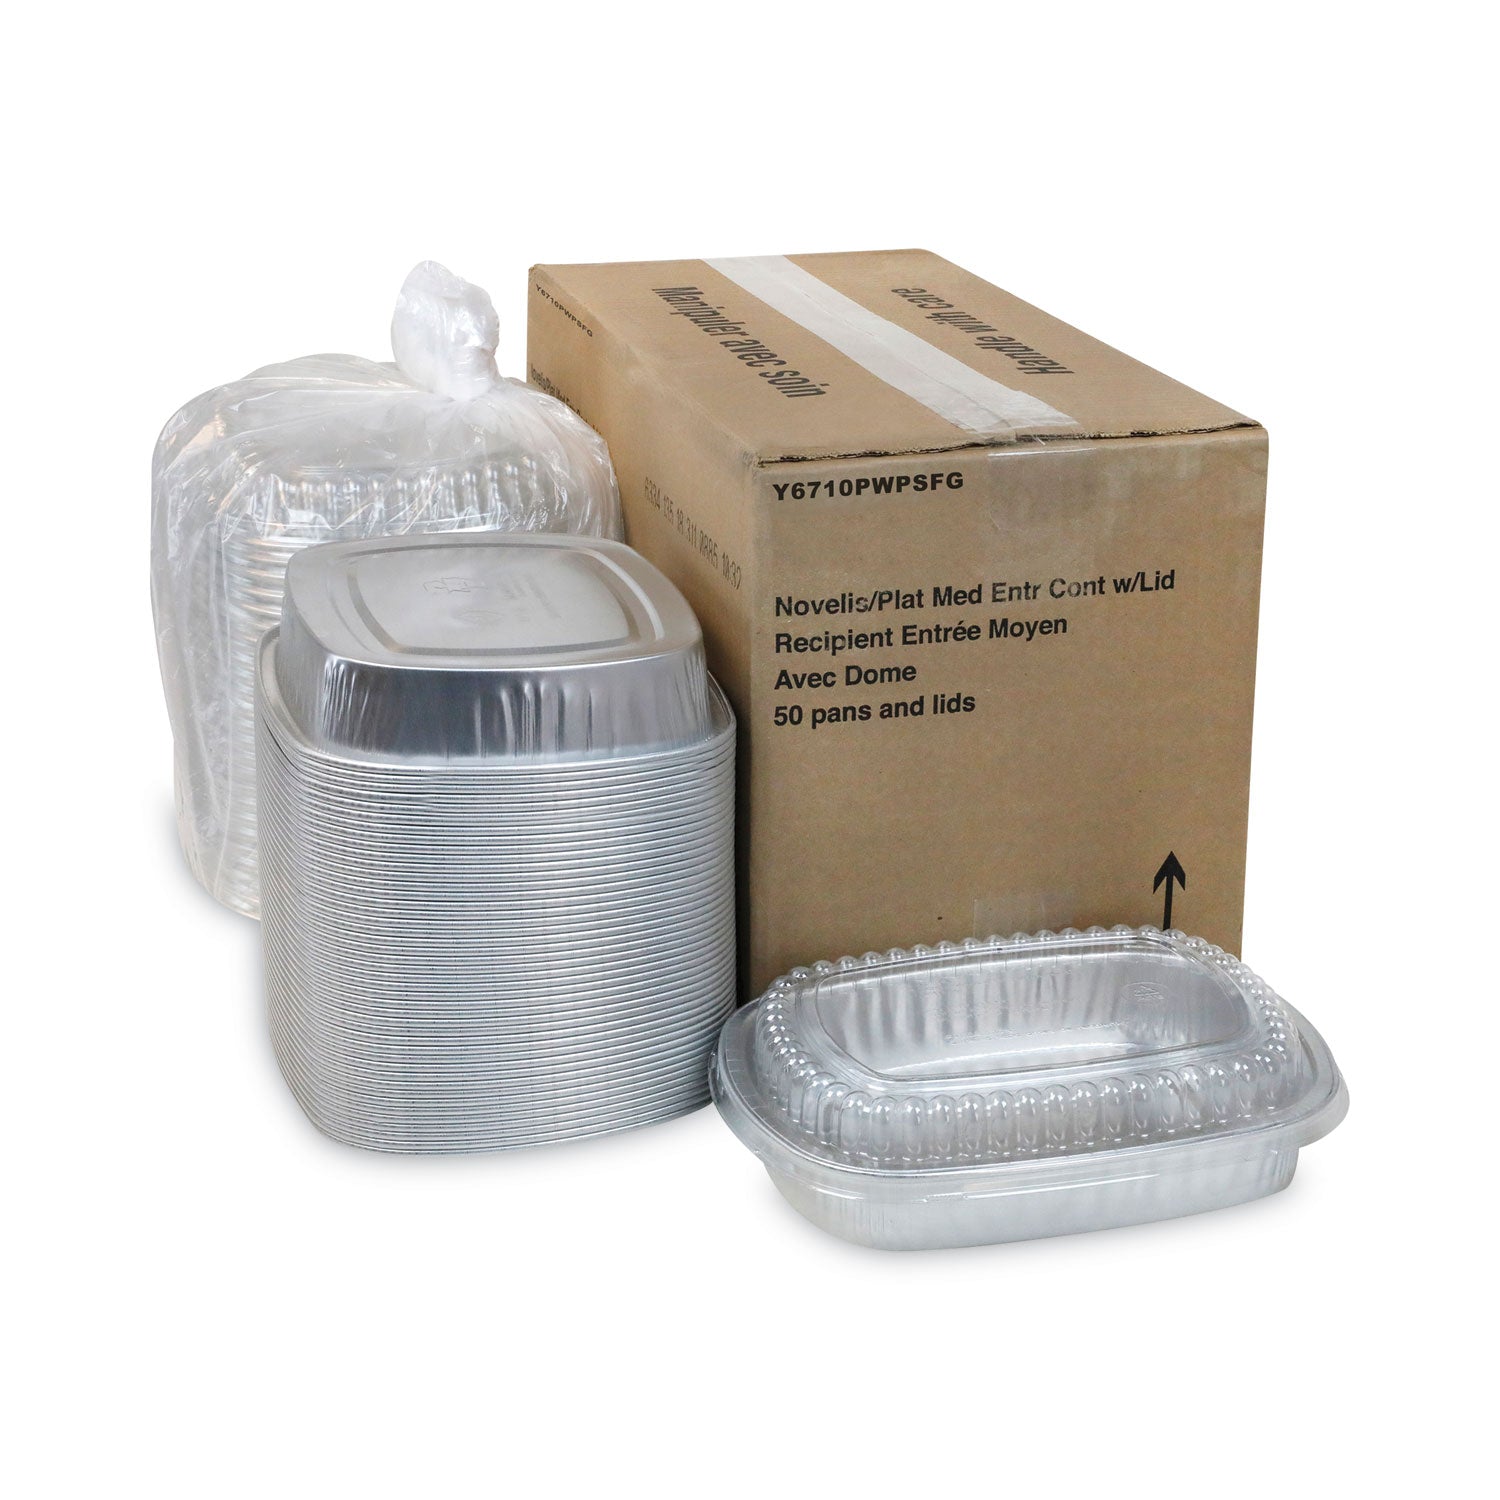 classic-carry-out-container-46-oz-975-x-775-x-175-silver-aluminum-50-carton_pcty6710pwpsfg - 3